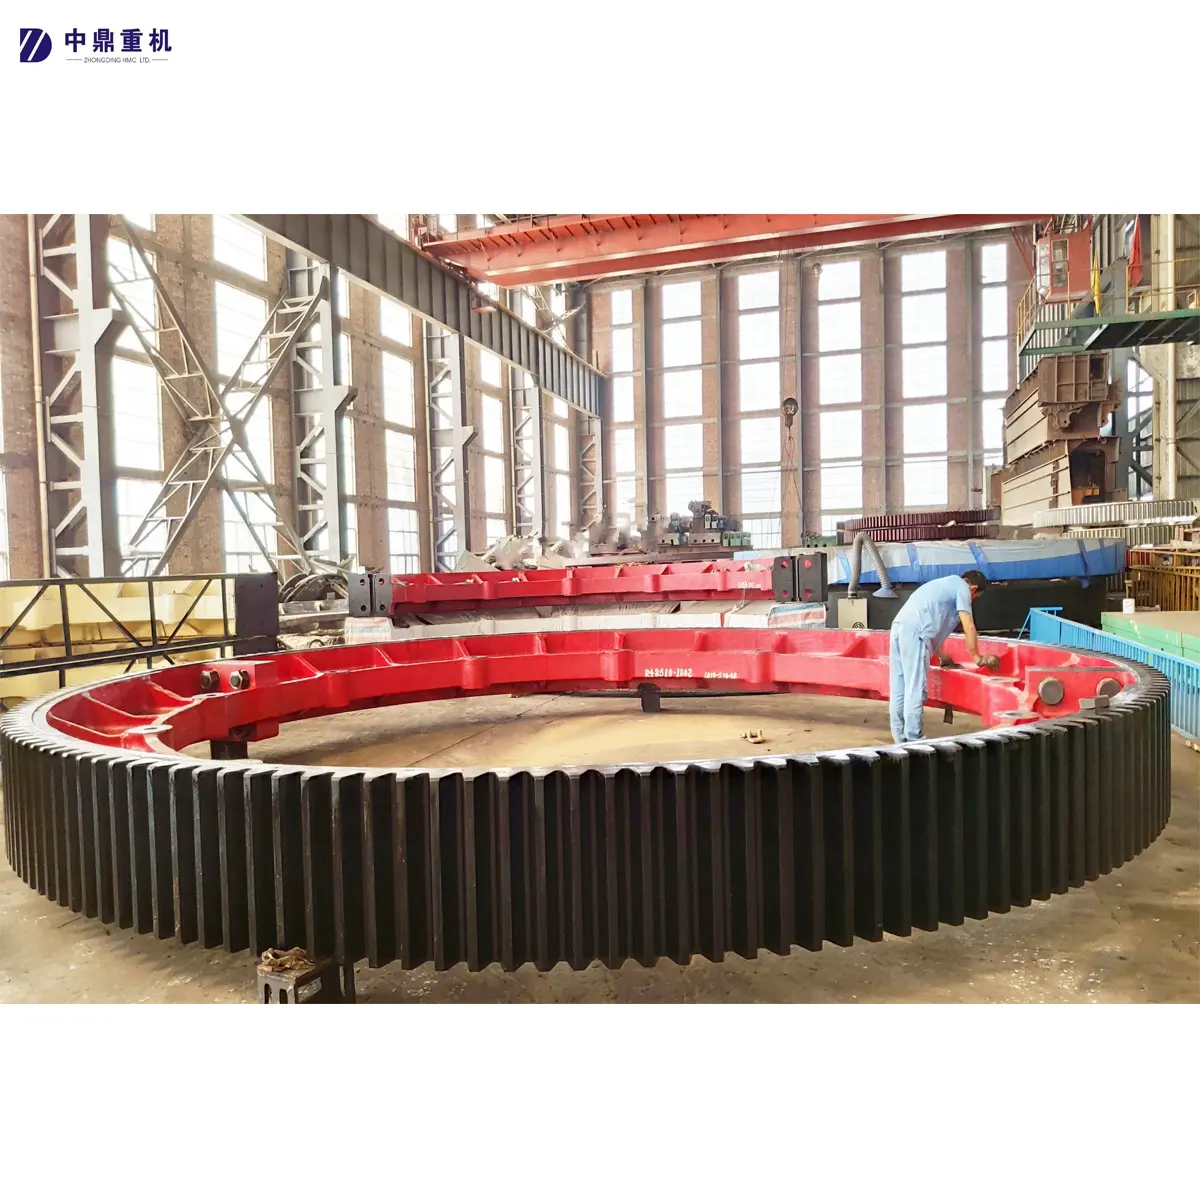 Cnc Milling Machining Casting Steel Rotary Kiln Helical Customized Double Spur Gear Wheel Design Outdoor Gears